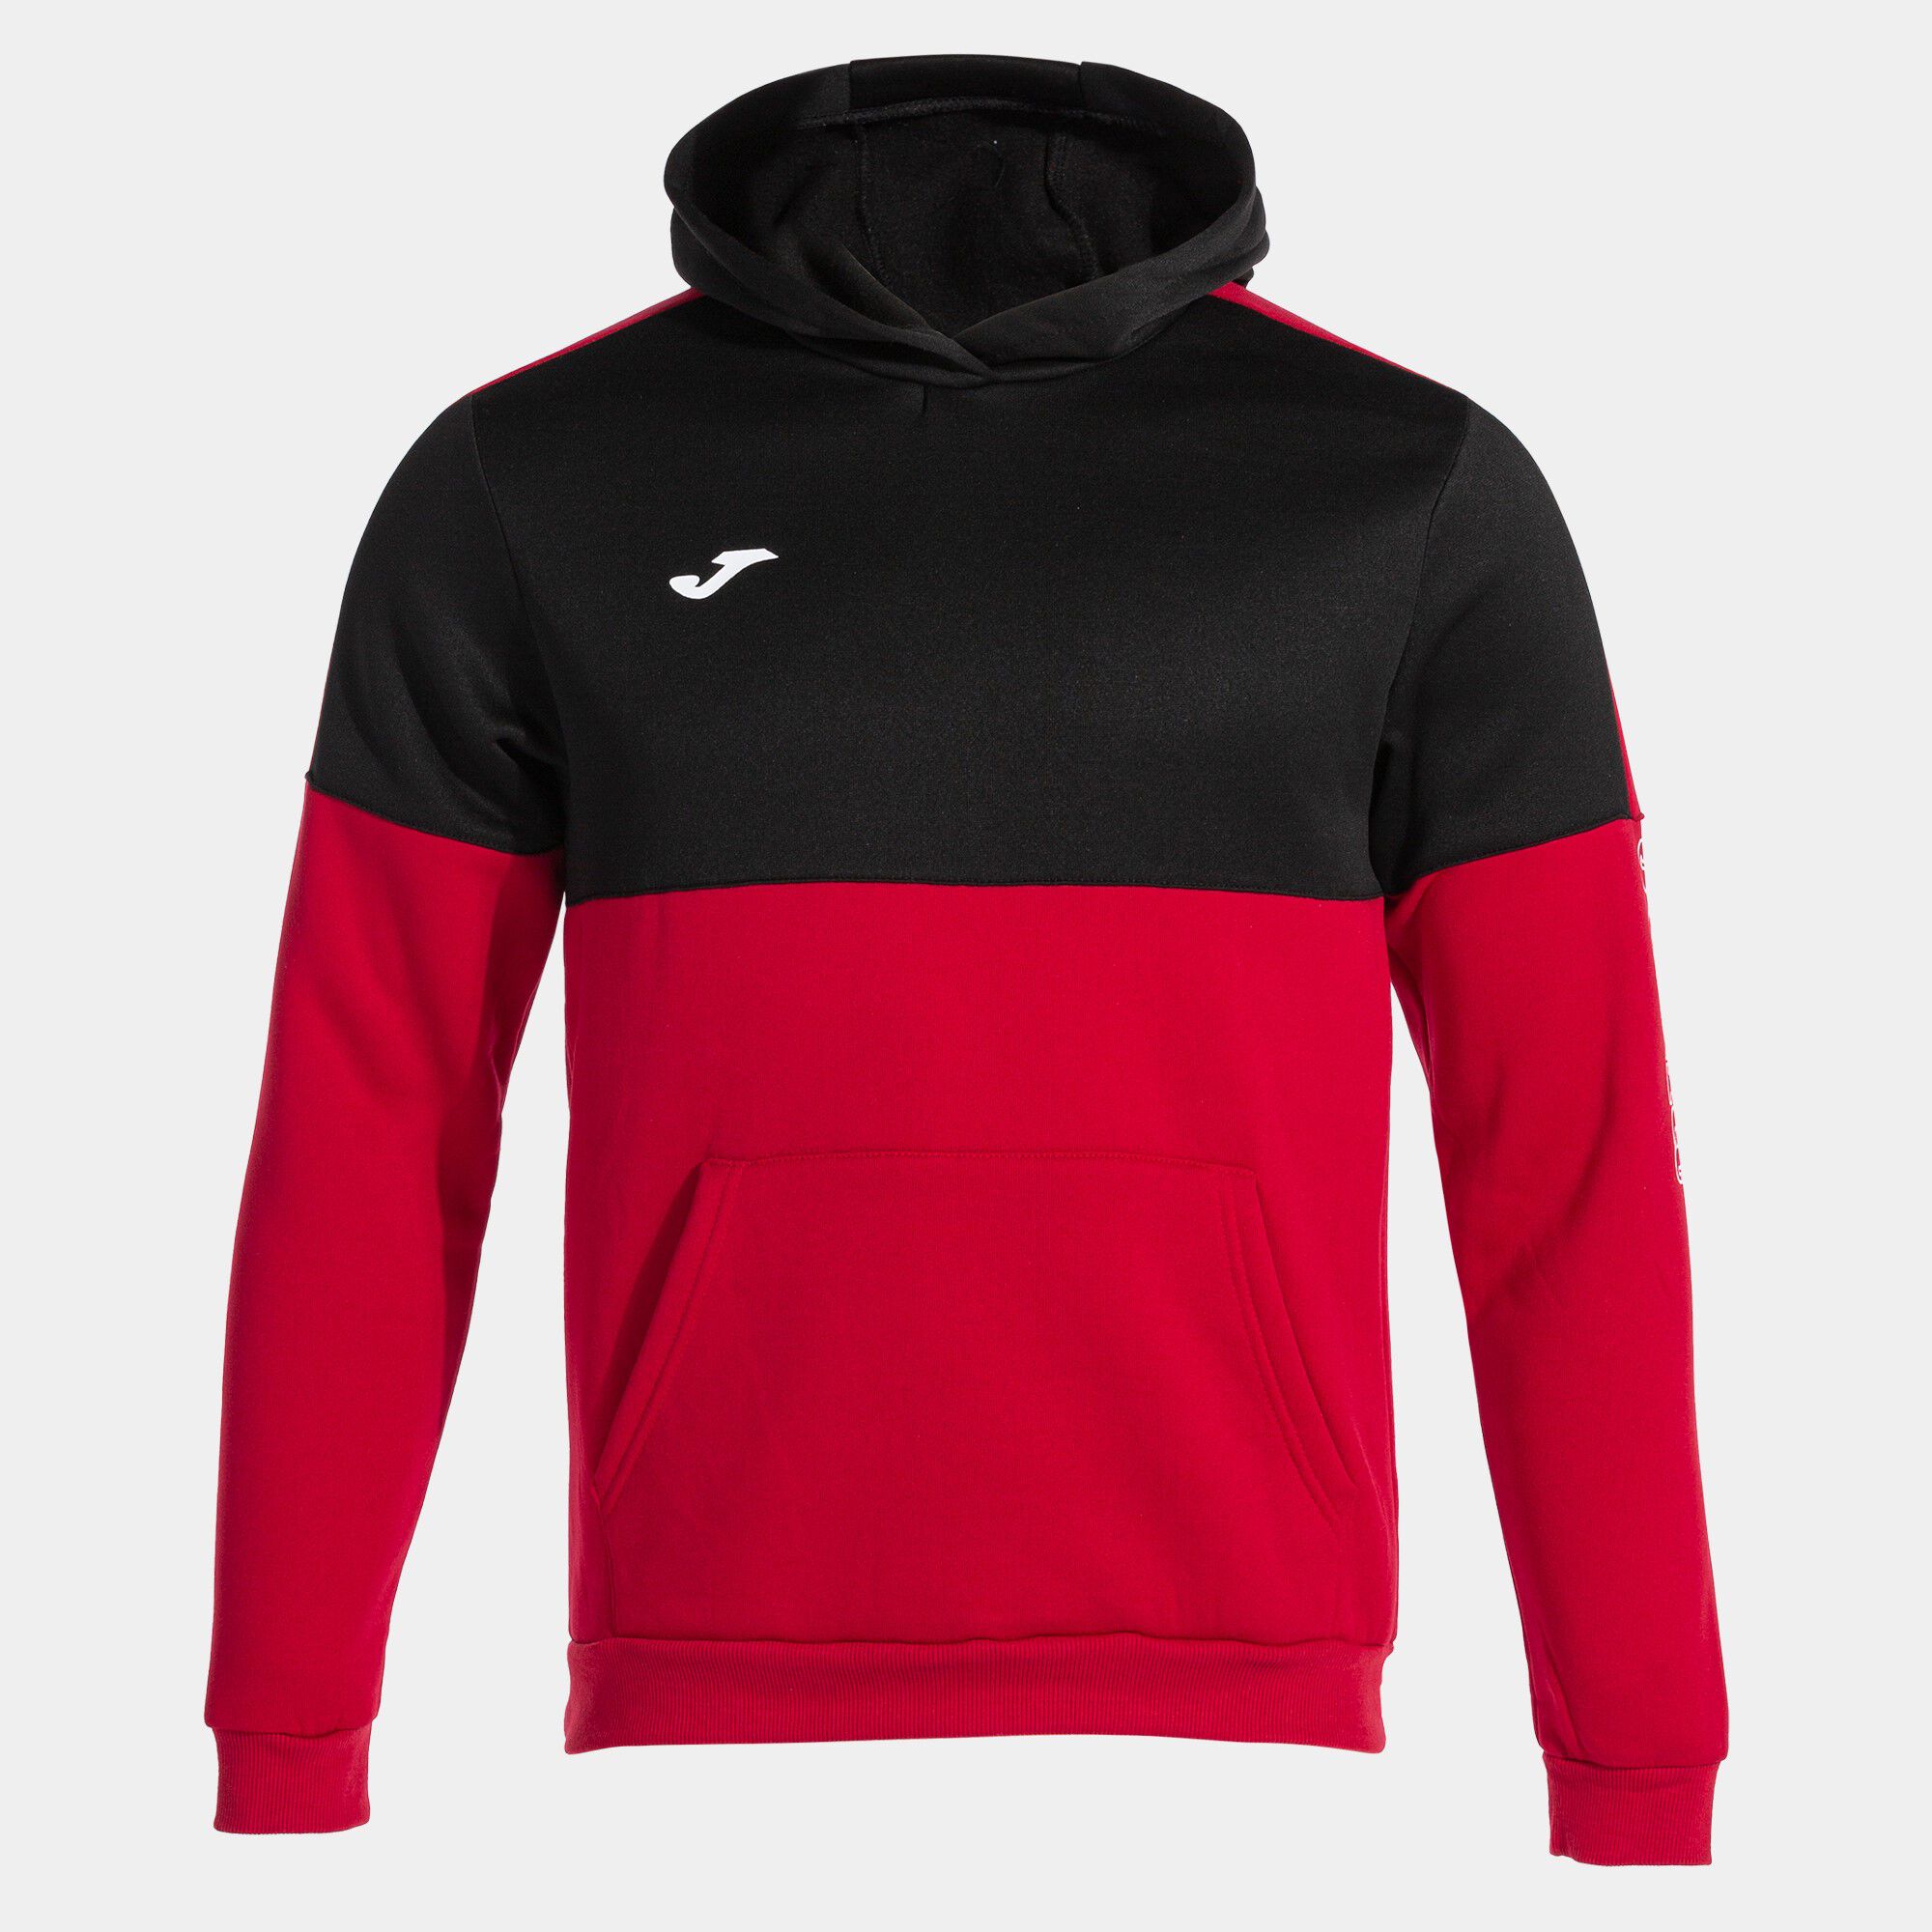 HOODED SWEATER UNISEX PART RED BLACK